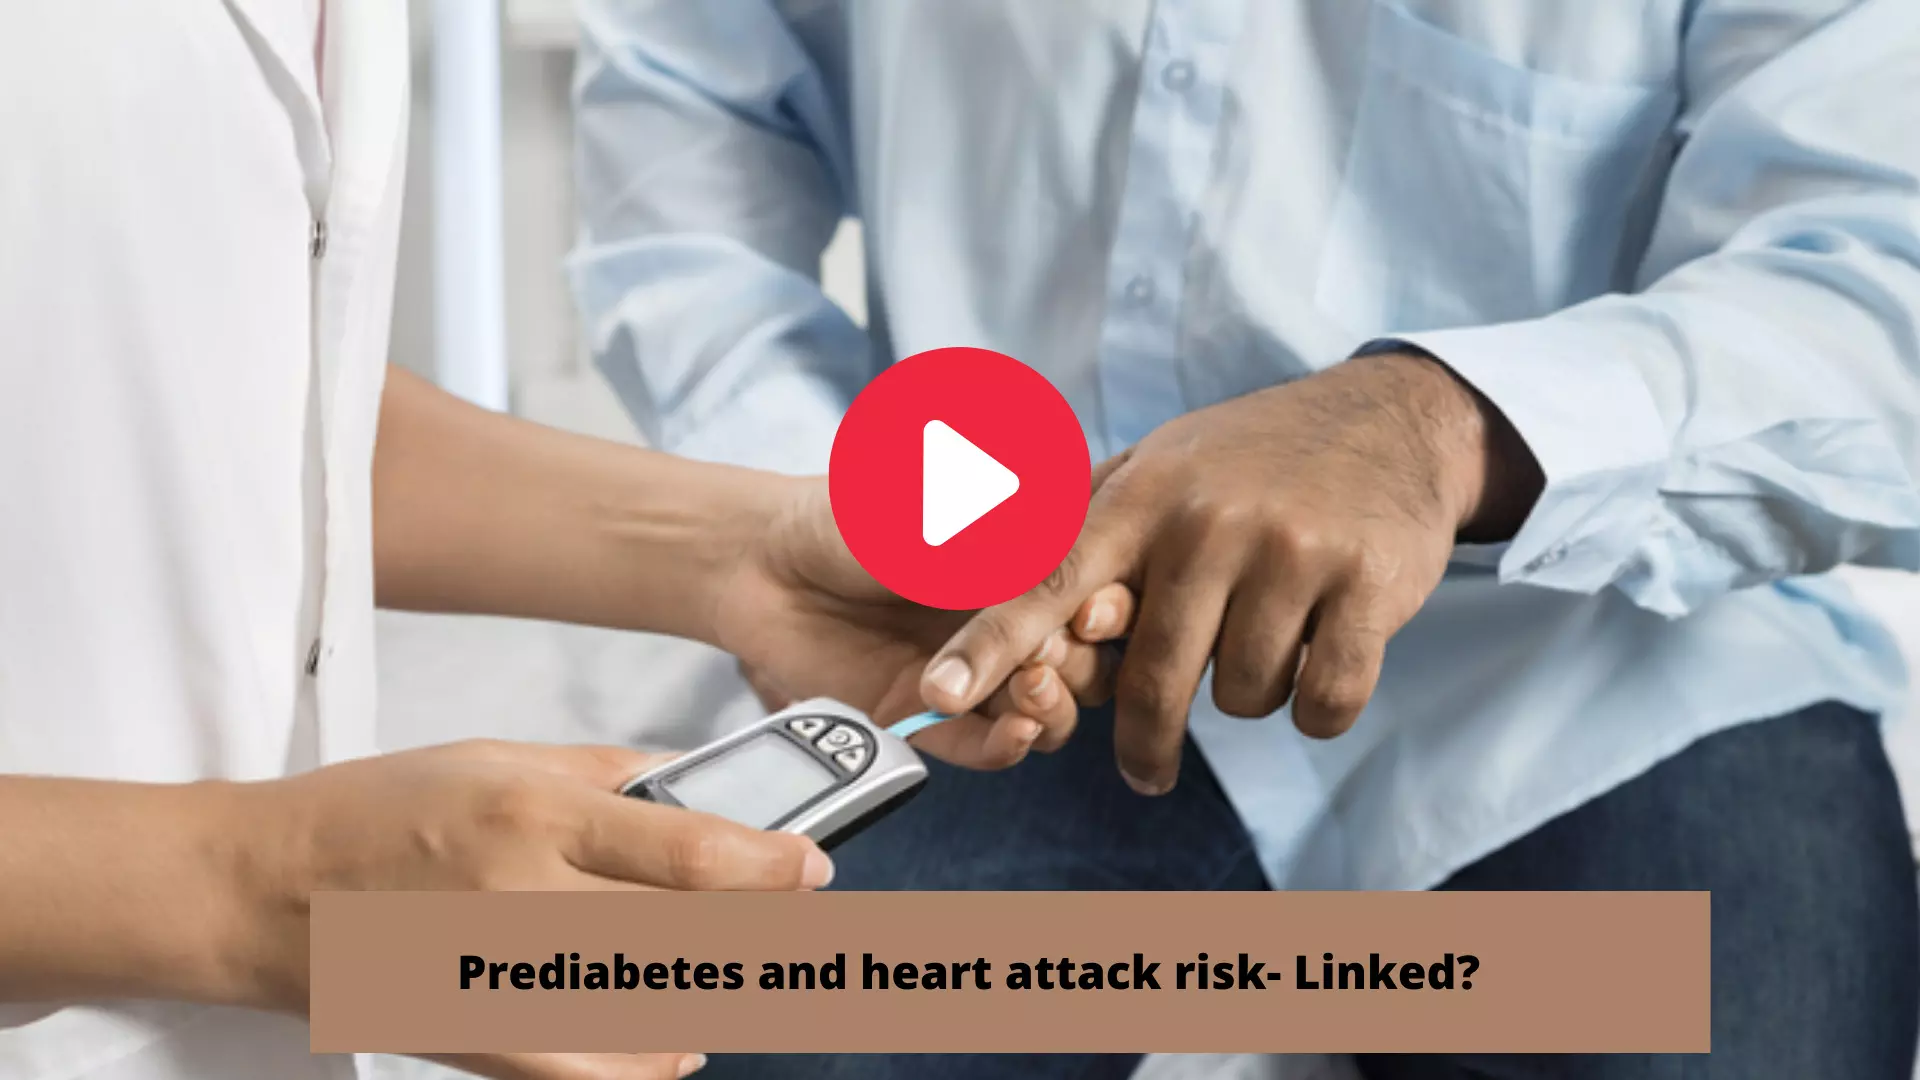 Prediabetes and heart attack risk- Linked?